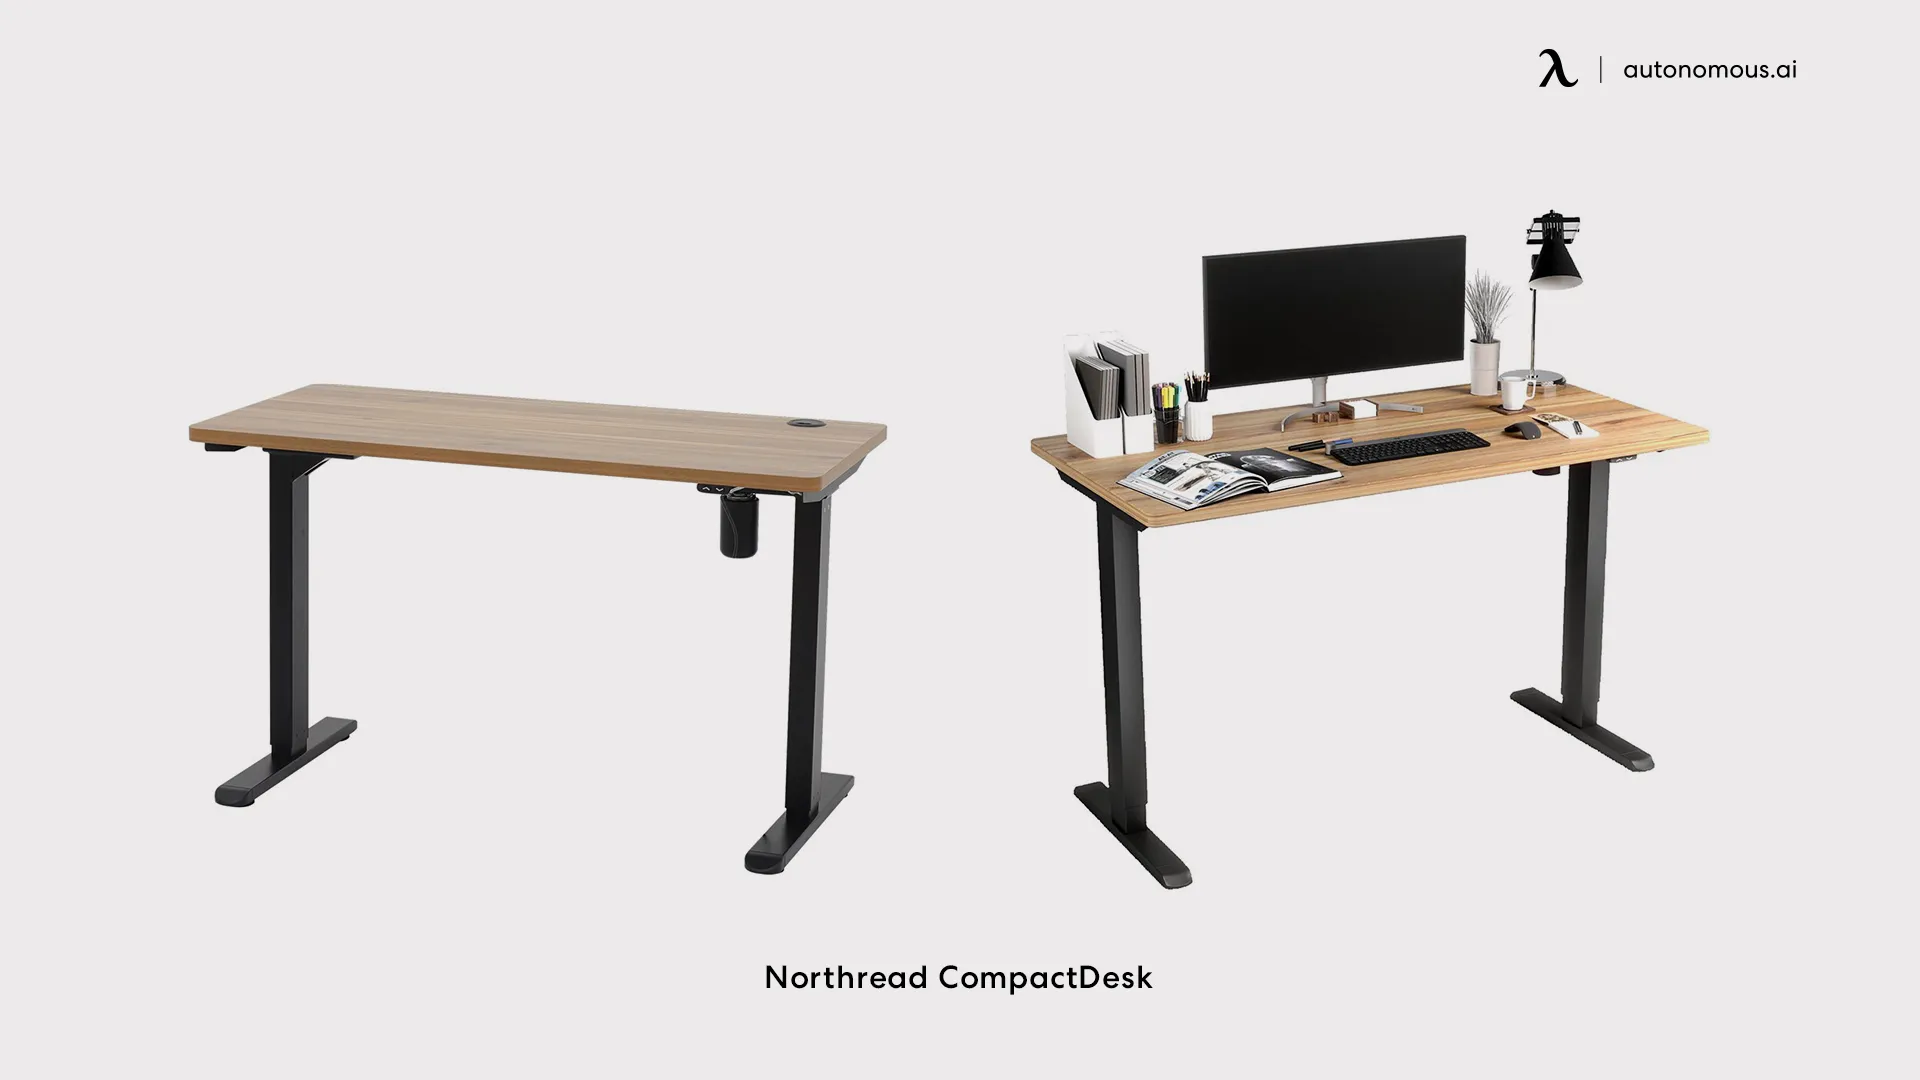 Smart Compact Desk by Northread